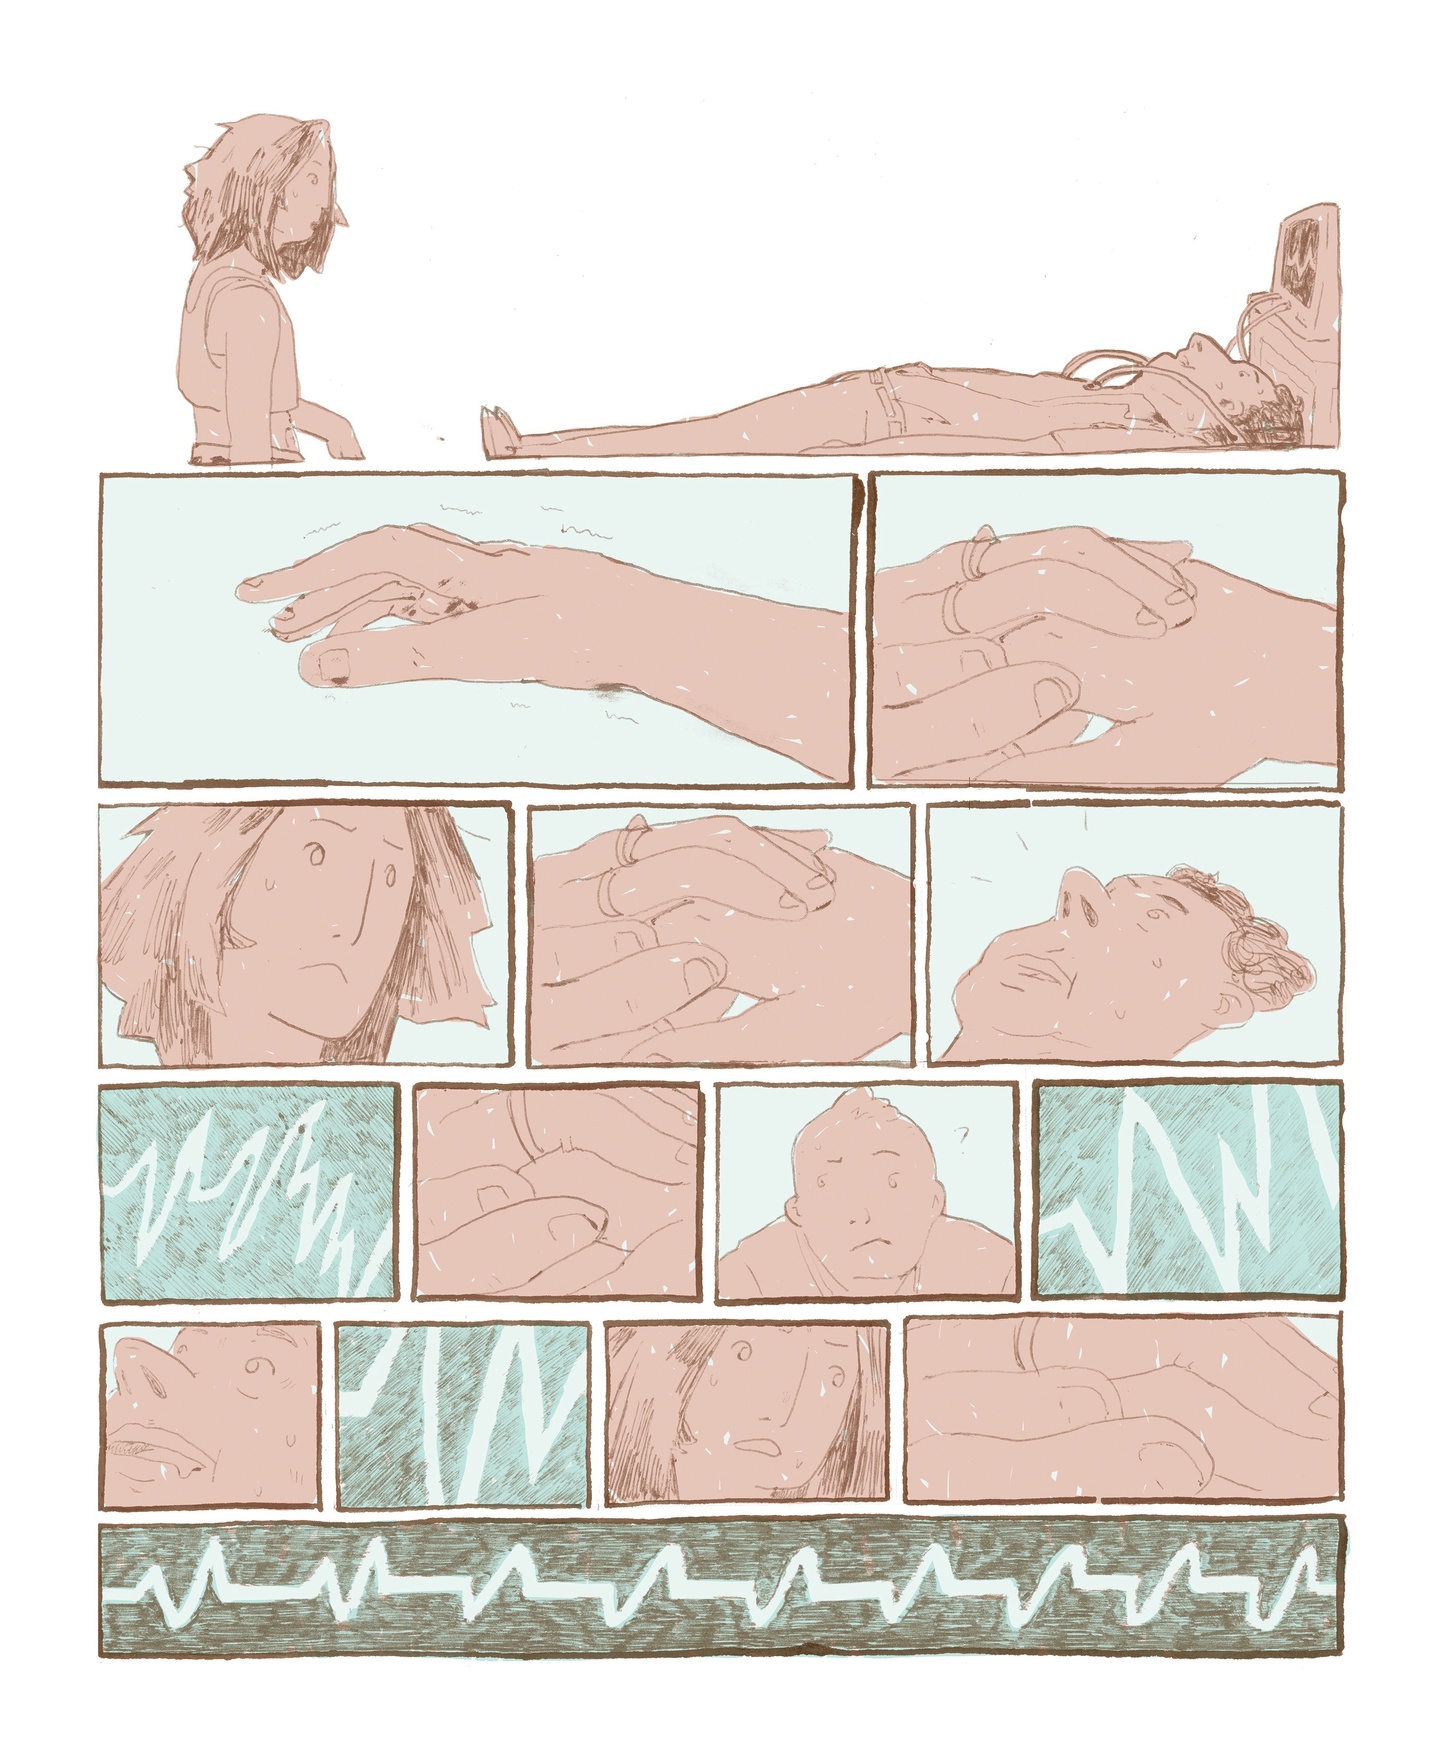 Comic page - the person in a tank top holds hands with the sick person in the ambulance.